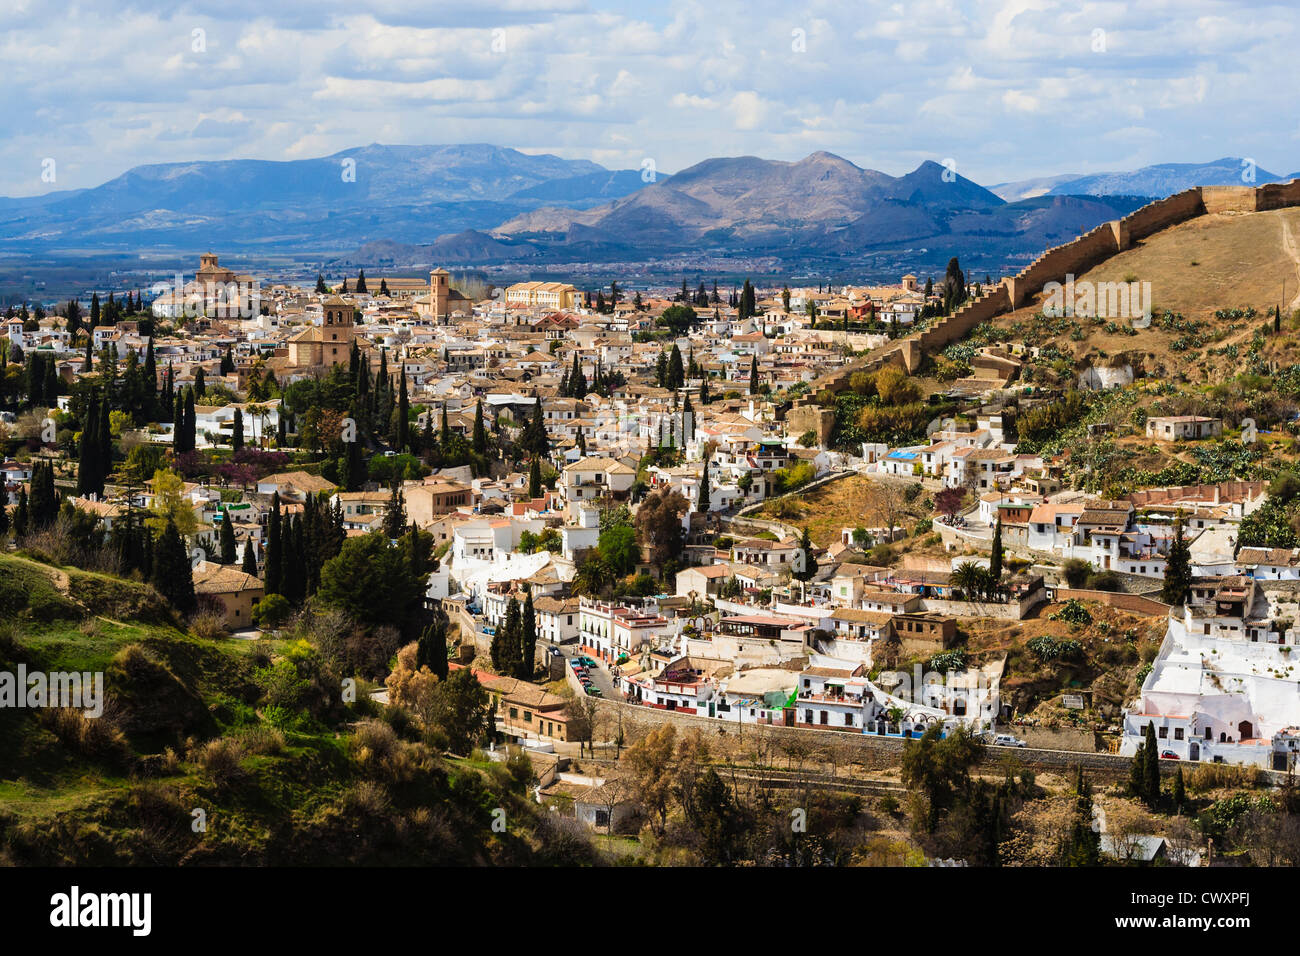 Overview of UNESCO listed Albaicin and Sacromonte quarter in Granada, Andalusia, Spain Stock Photo